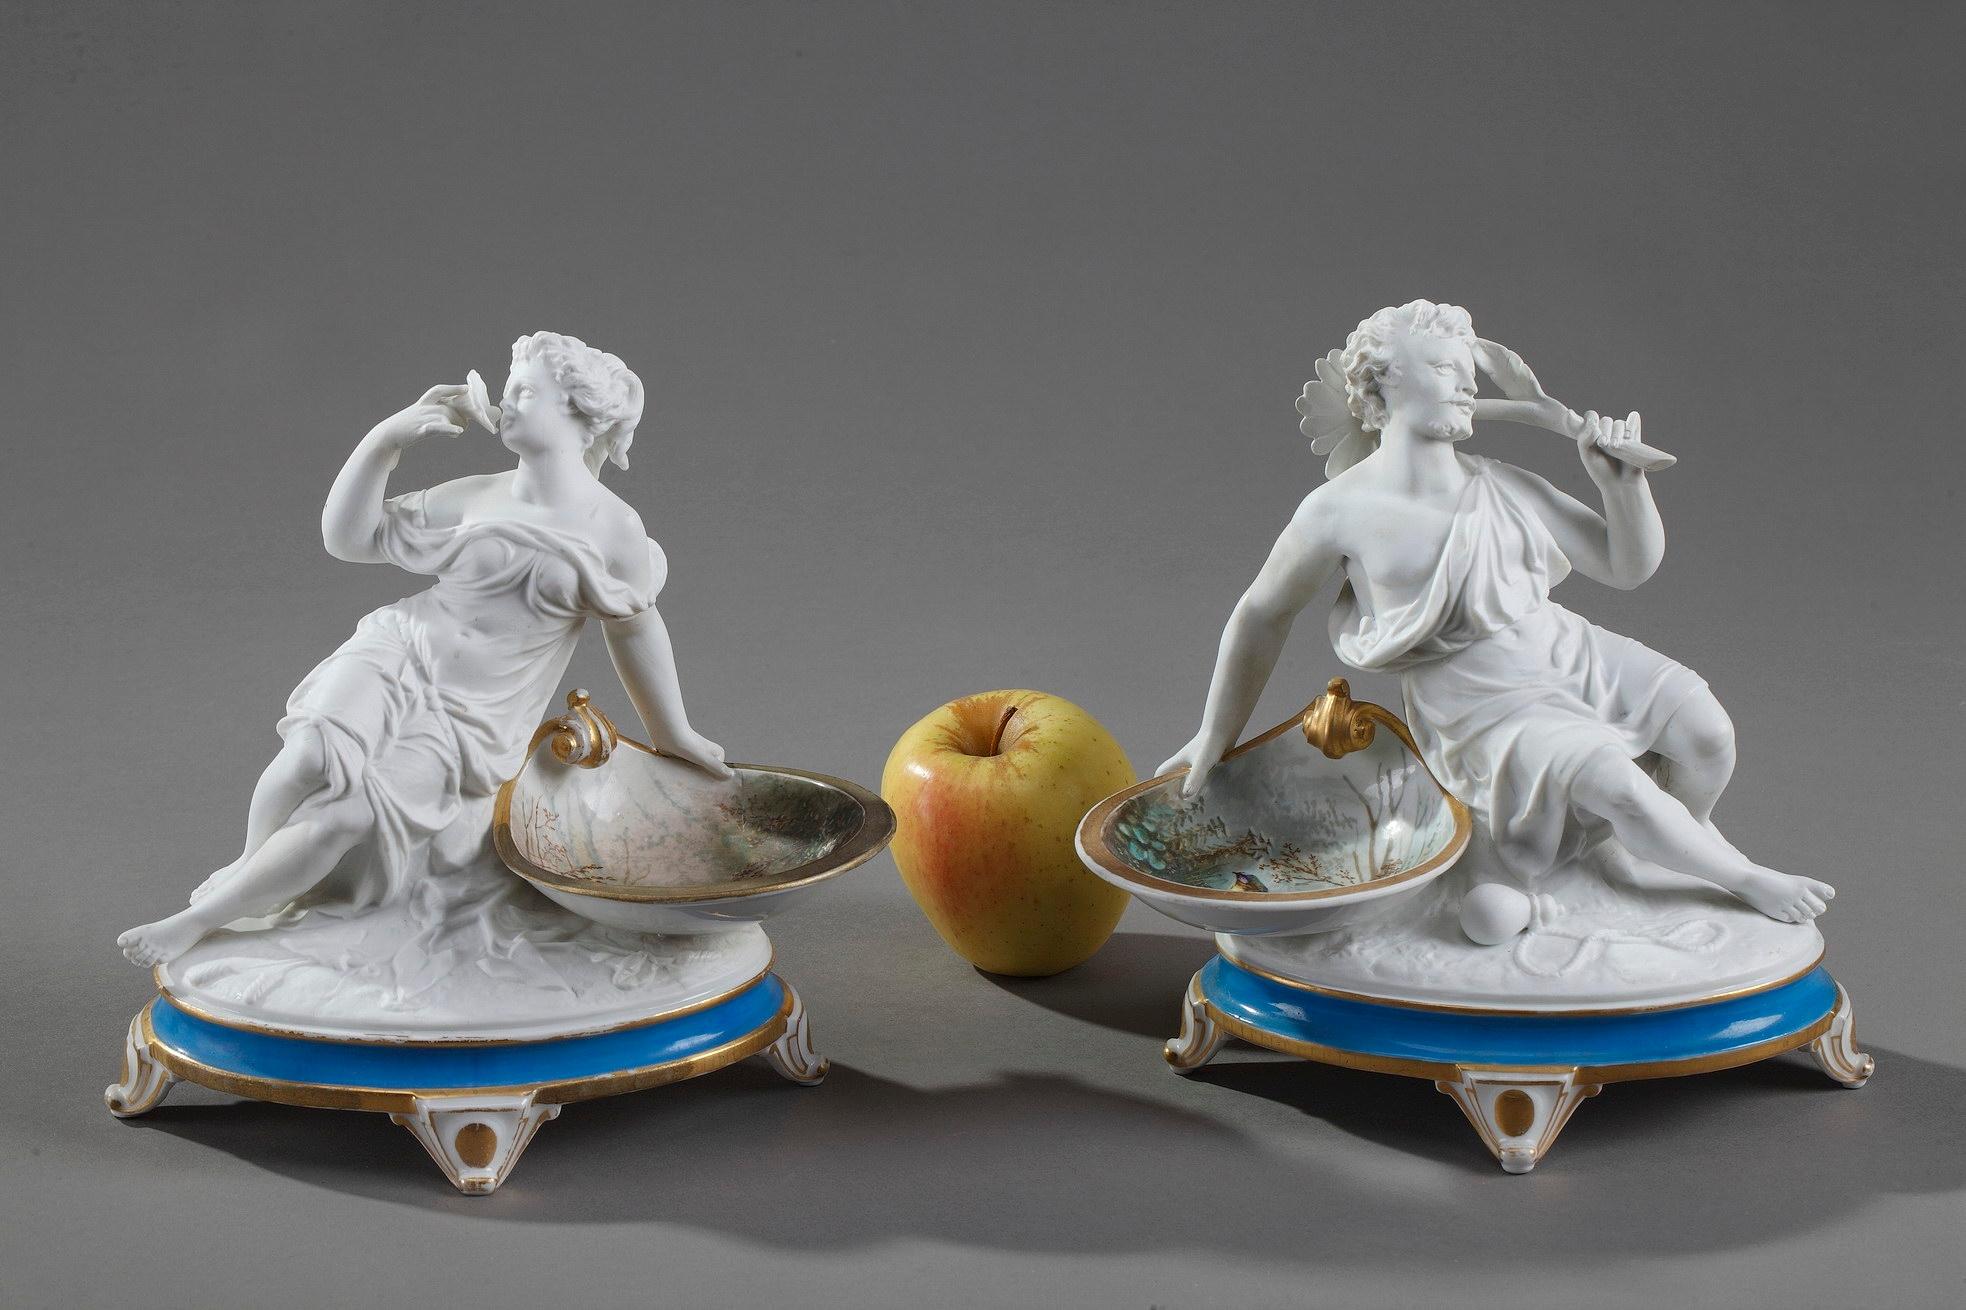 Pair of antique ring holders crafted in bisque? porcelain? featuring a man and a woman posed in classically-inspired robes. They are lying on a rock near a small dish with polychromatic decoration of birds in a landscape. The bisque figurines are